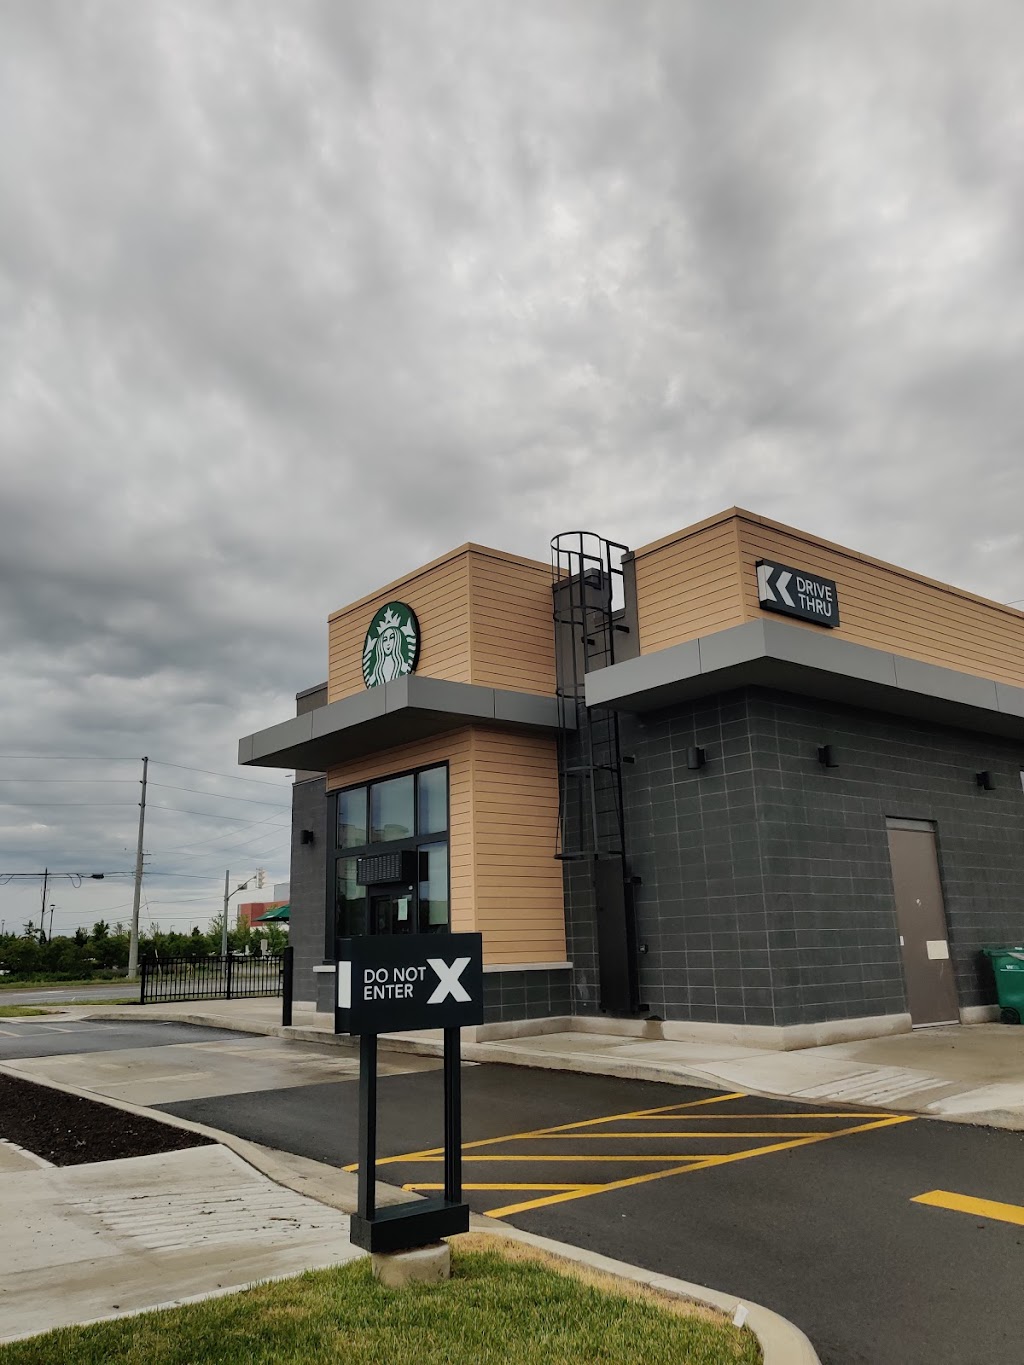 Starbucks | 295 Fourth Ave, St. Catharines, ON L2S 0E7, Canada | Phone: (289) 968-3284